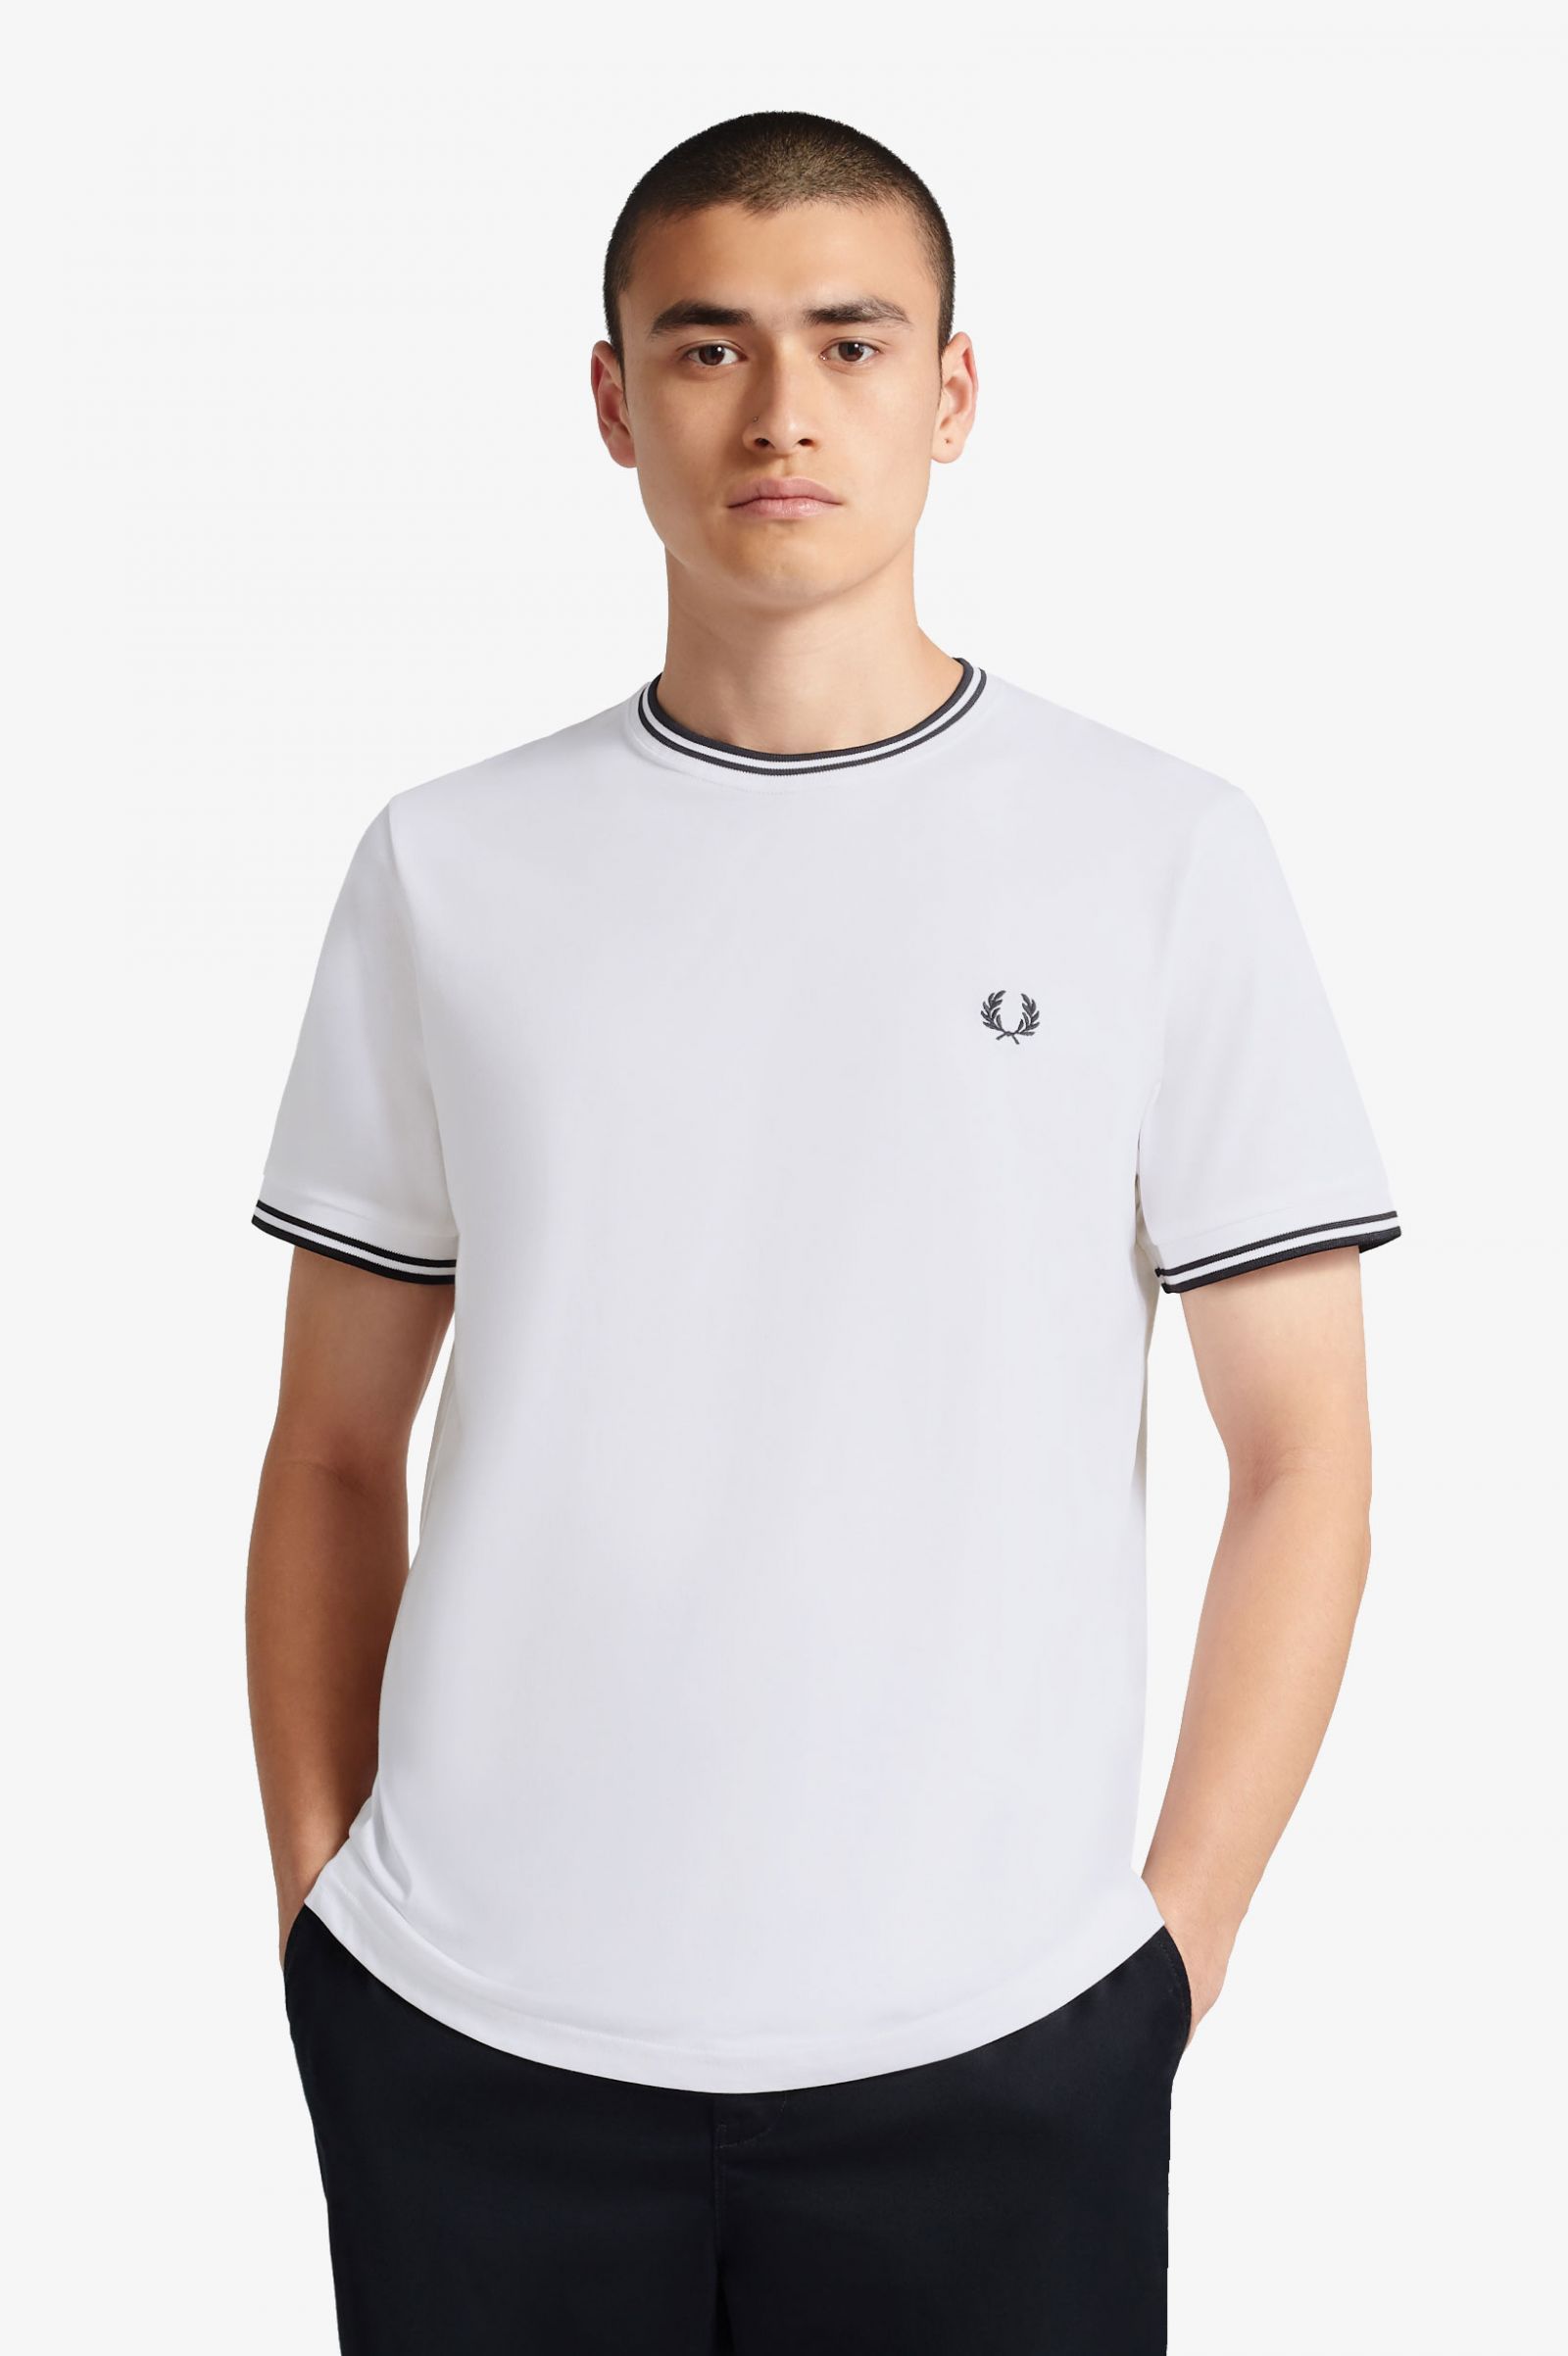 CAMISETA FRED PERRY TWIN TIPPED BRANCA